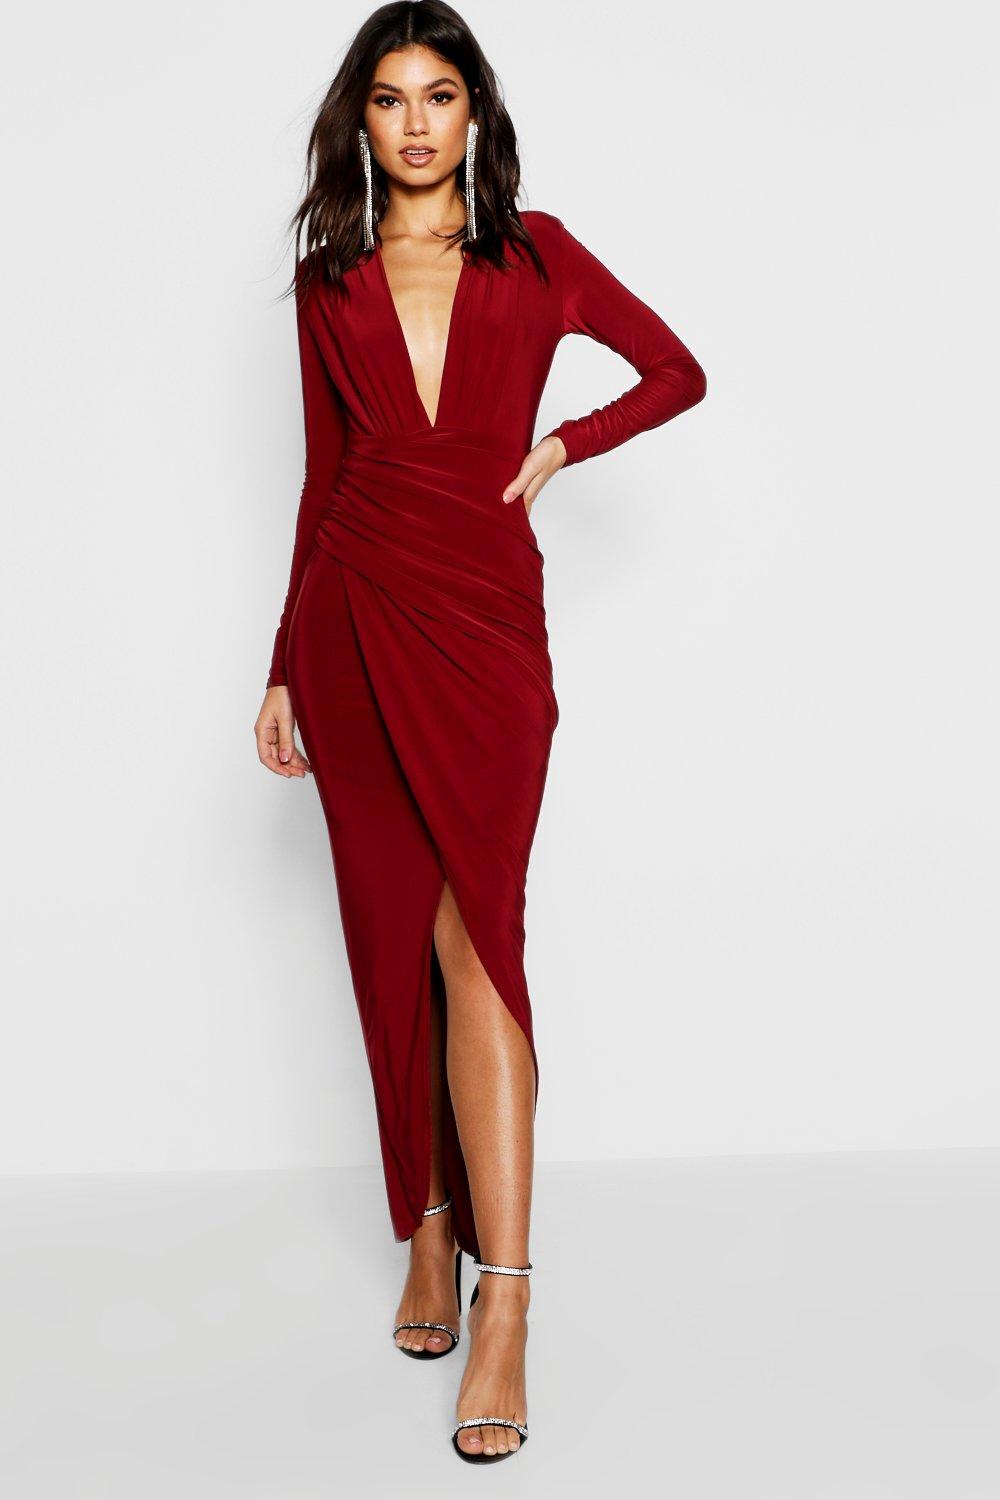 Anoush Plunge Rouched Detail Maxi Dress at boohoo.com